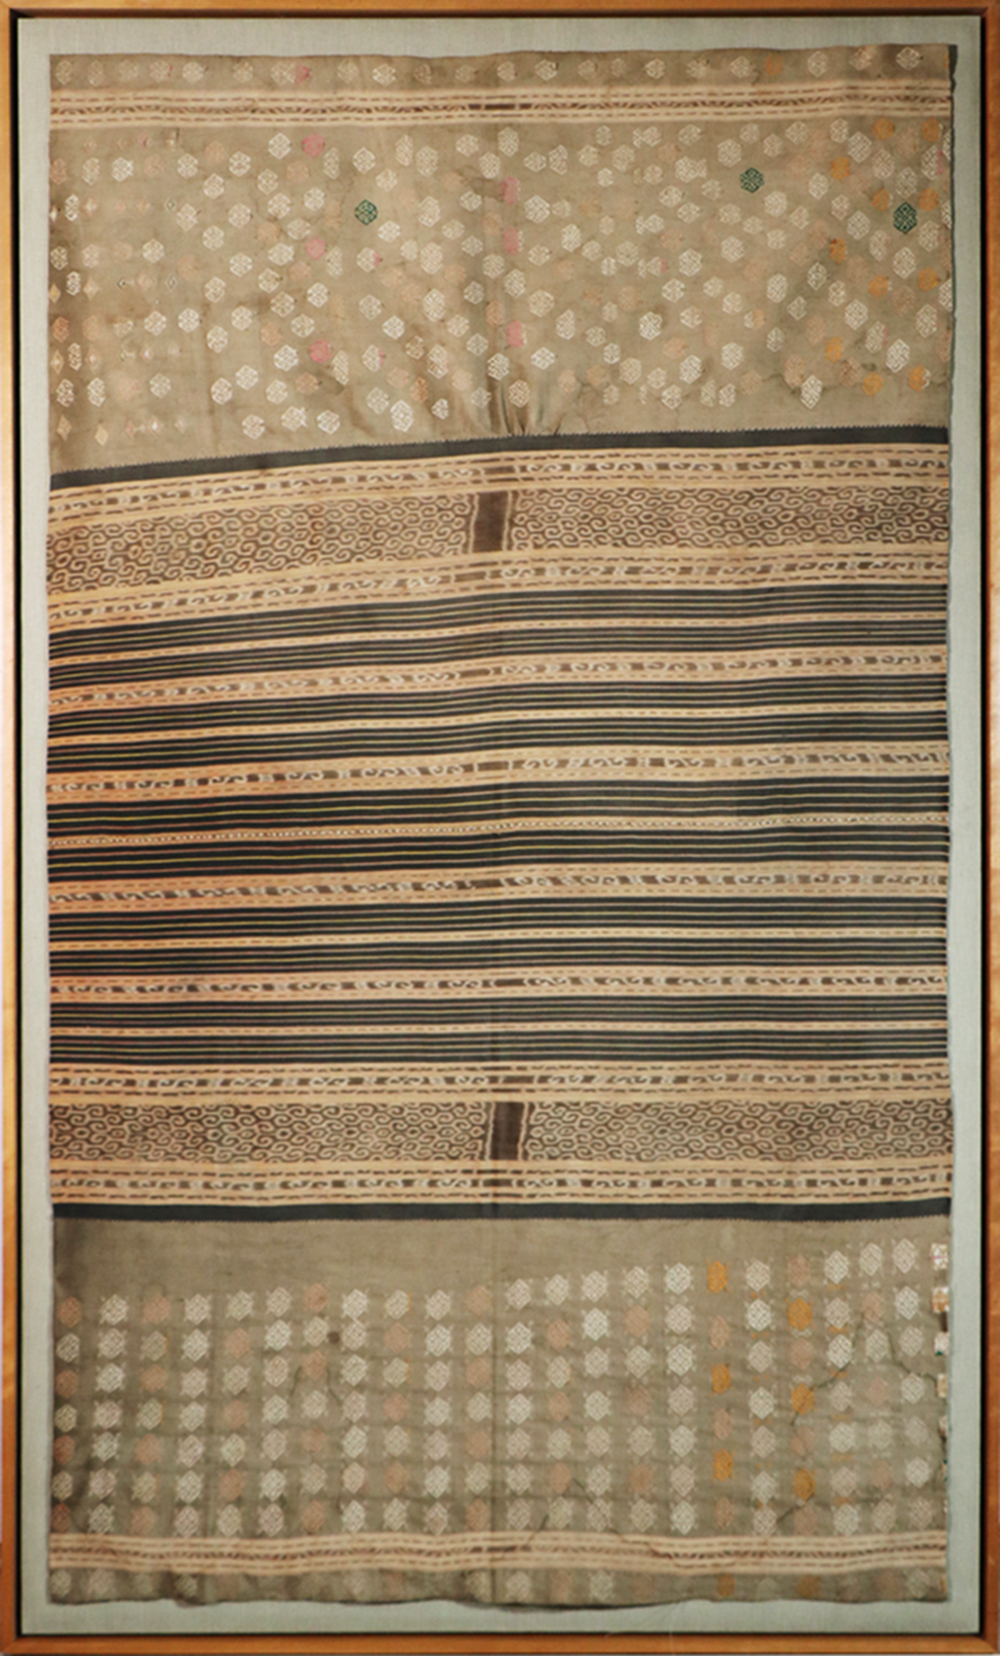 EARLY WOVEN INDONESIAN TEXTILE 2b51a8